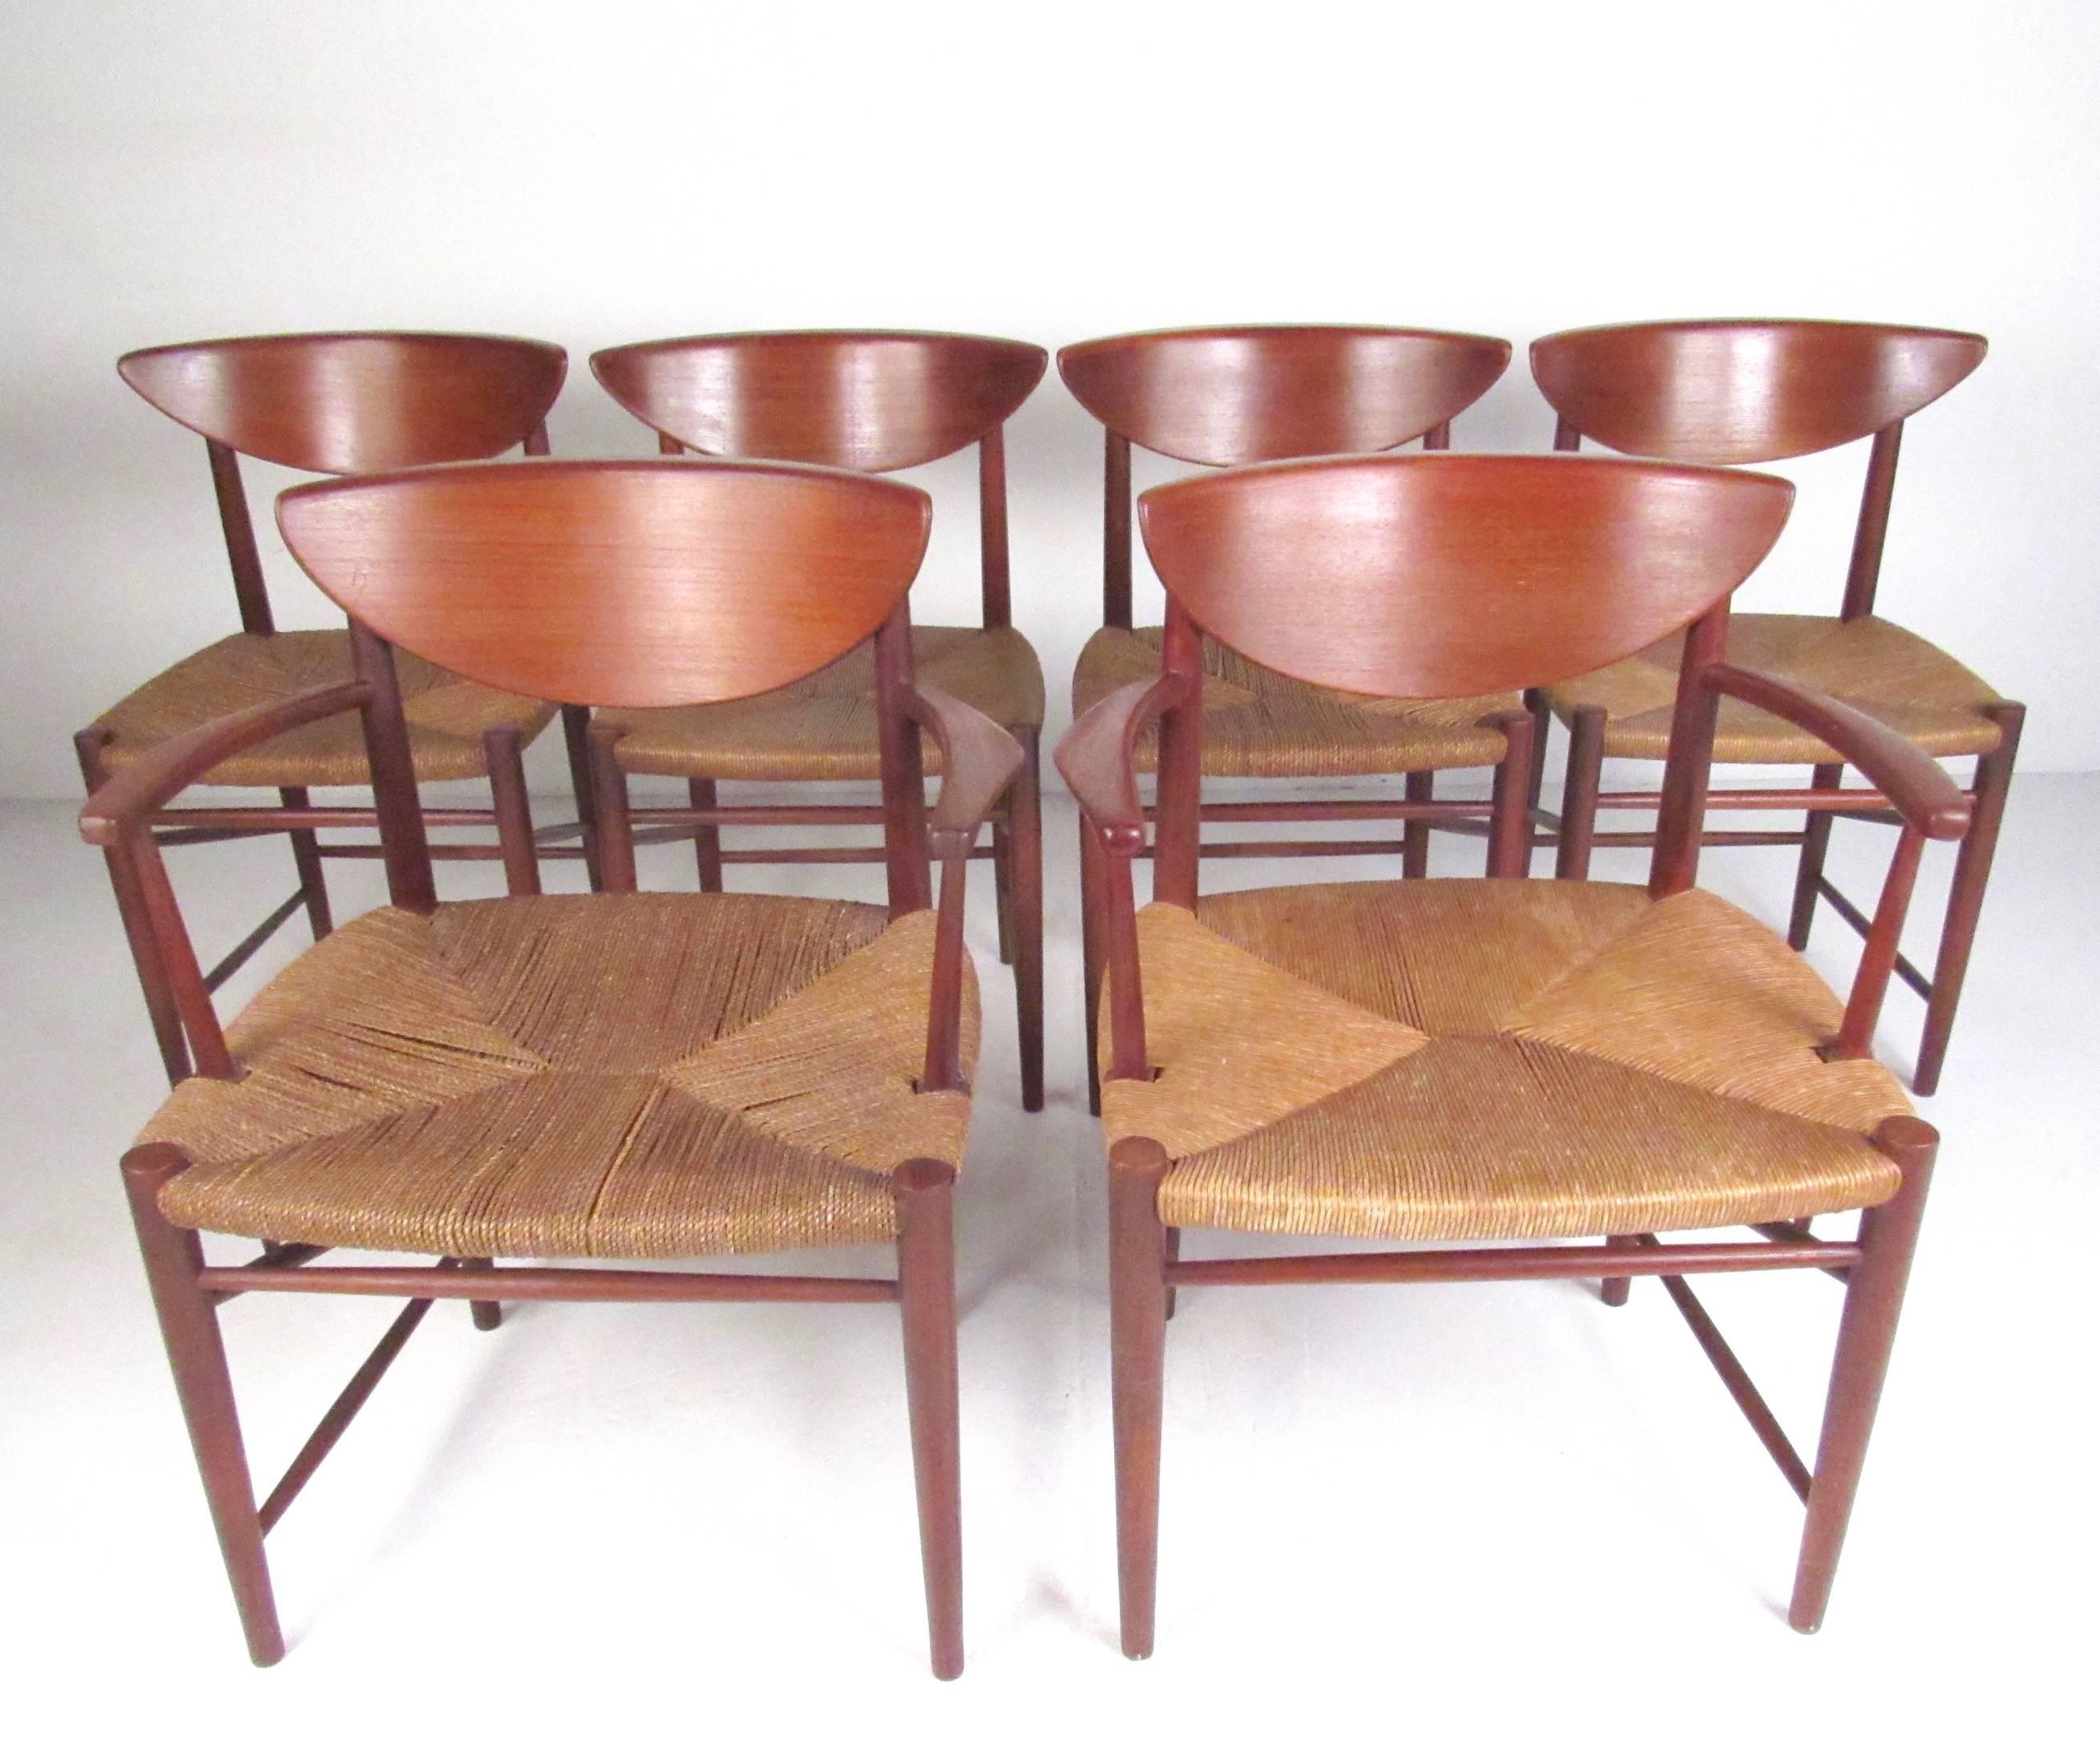 This gorgeous set of Mid-Century Modern teak dining chairs feature sculpted teak frames and iconic woven rush seats. Designed by Peter Hvidt for Soborg Mobelfabrik, this stylish set of six chairs boast a rich teak finish and comfortable design.